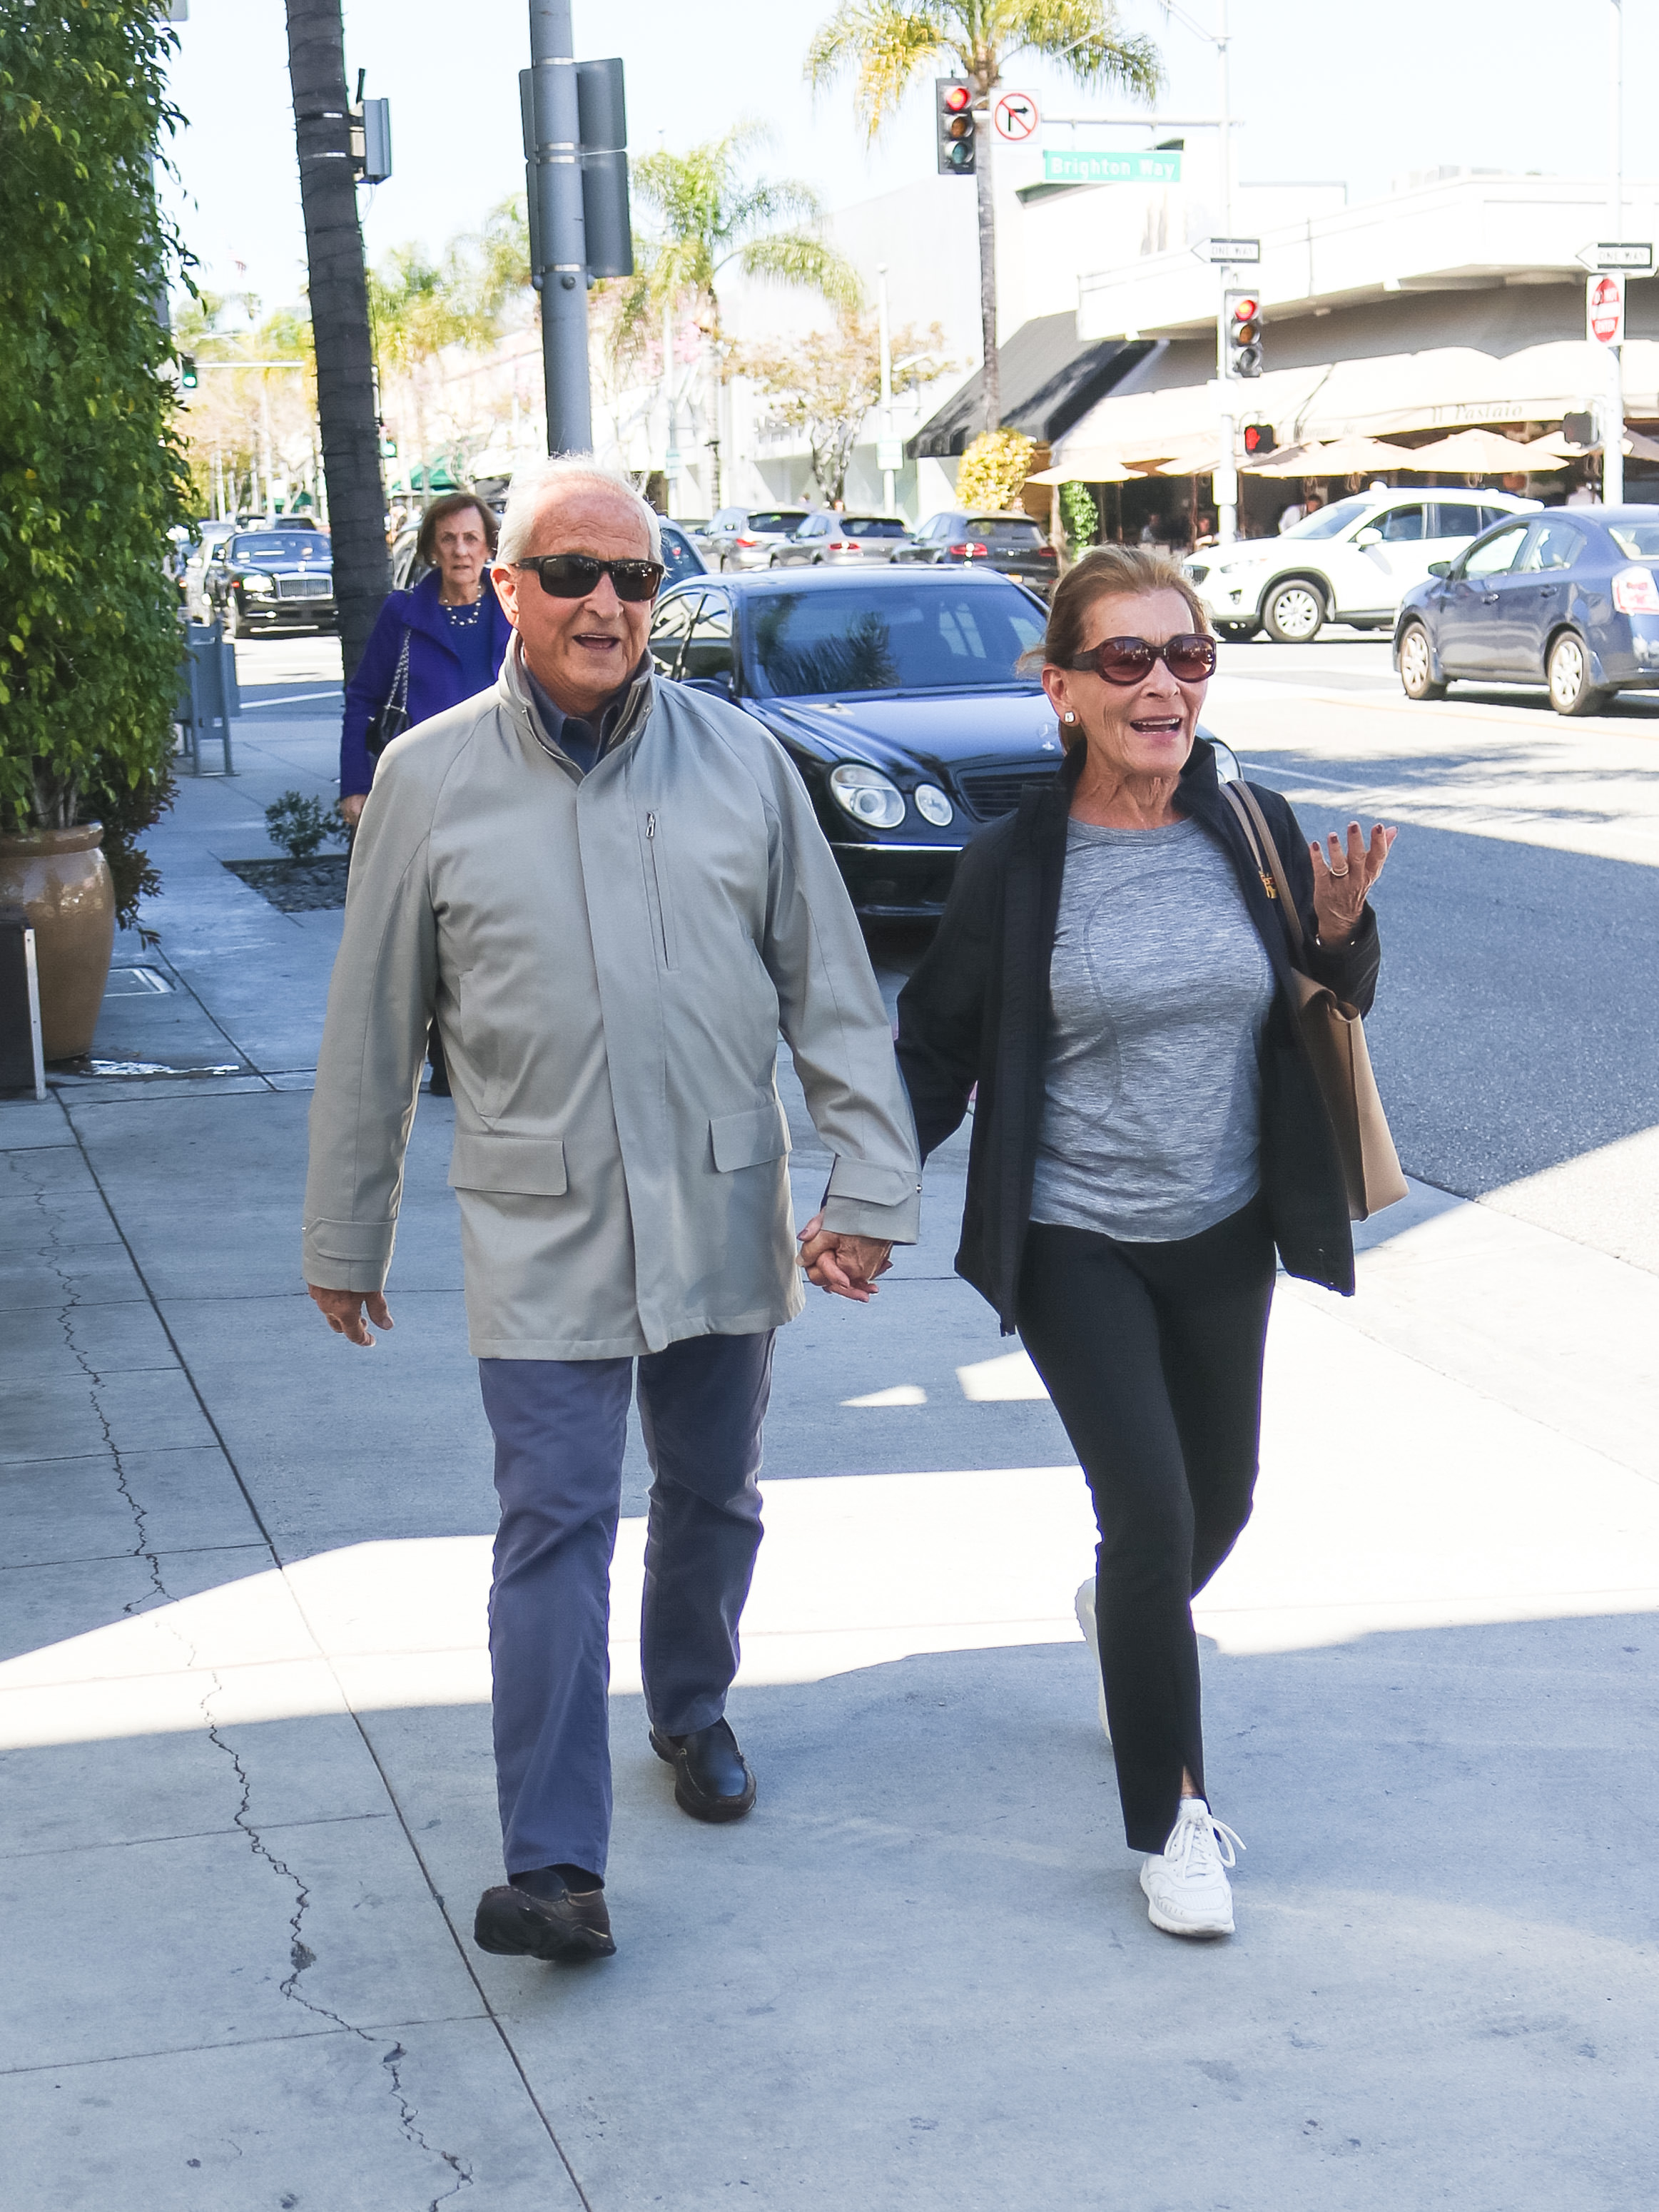 Judy Sheindlin and Jerry Sheindlin photographed in Los Angeles, California on March 14, 2019 | Source: Getty Images